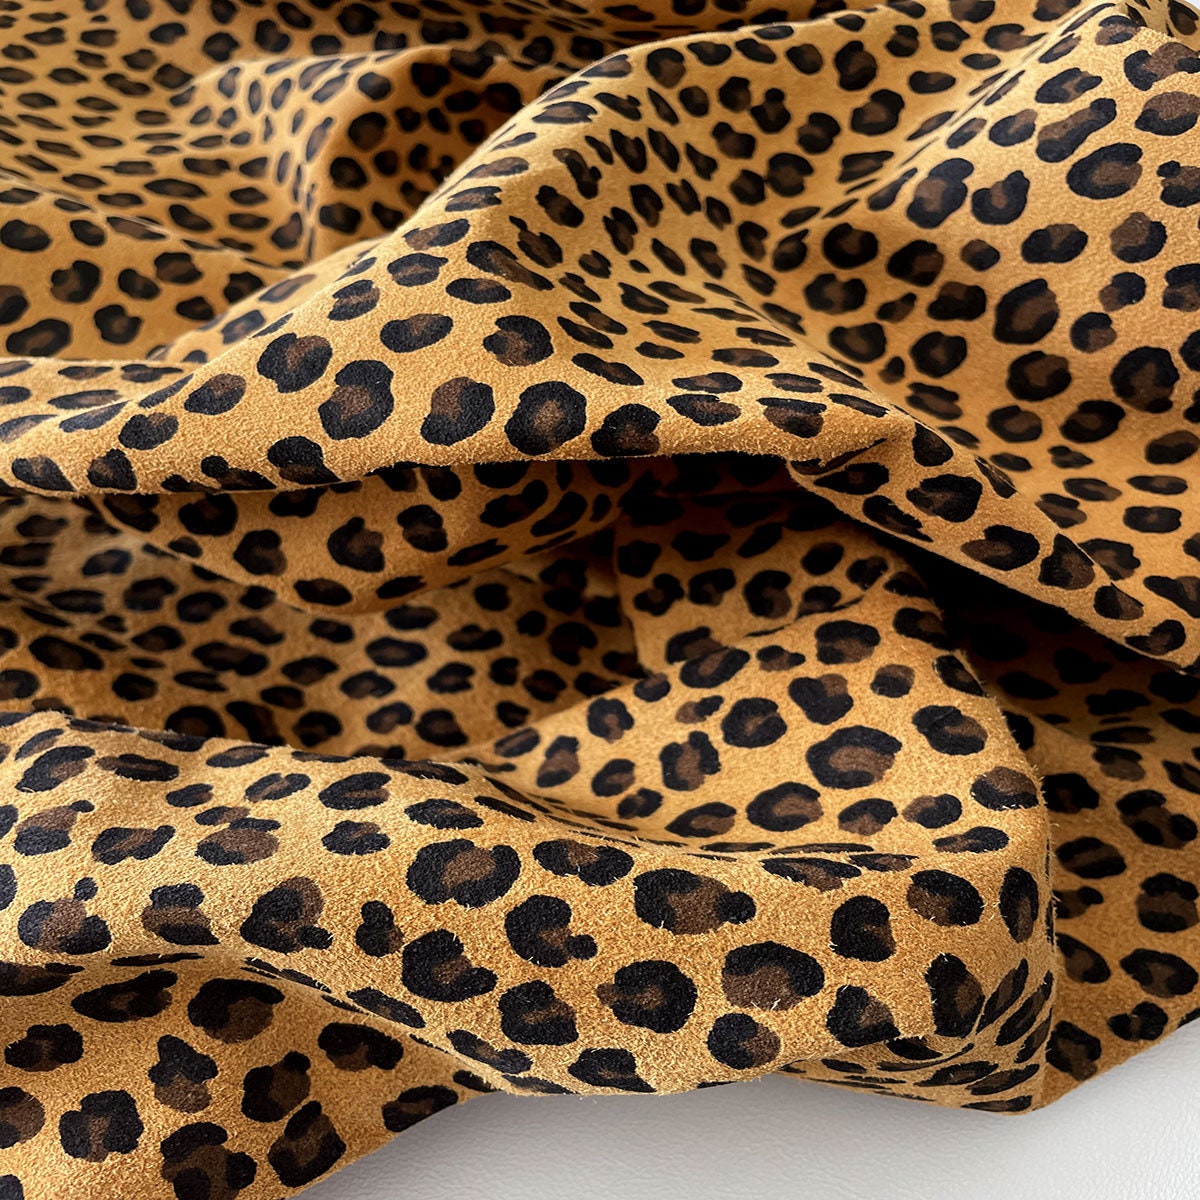 Camel Leopard Print Suede Leather Hide, Printed Leather, Leather